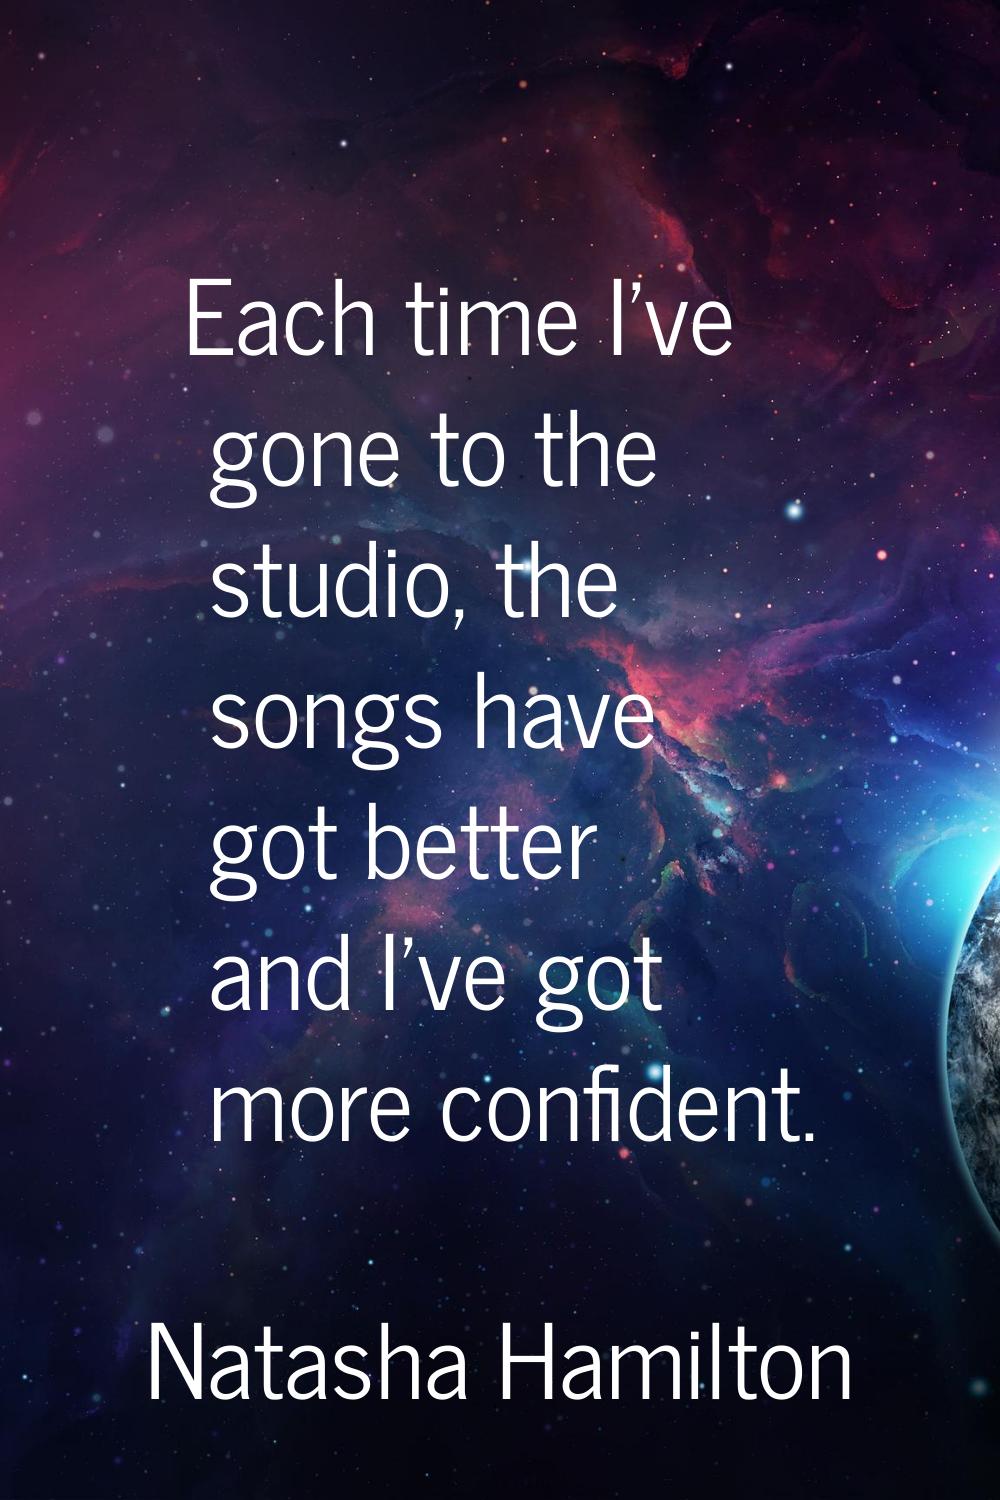 Each time I've gone to the studio, the songs have got better and I've got more confident.